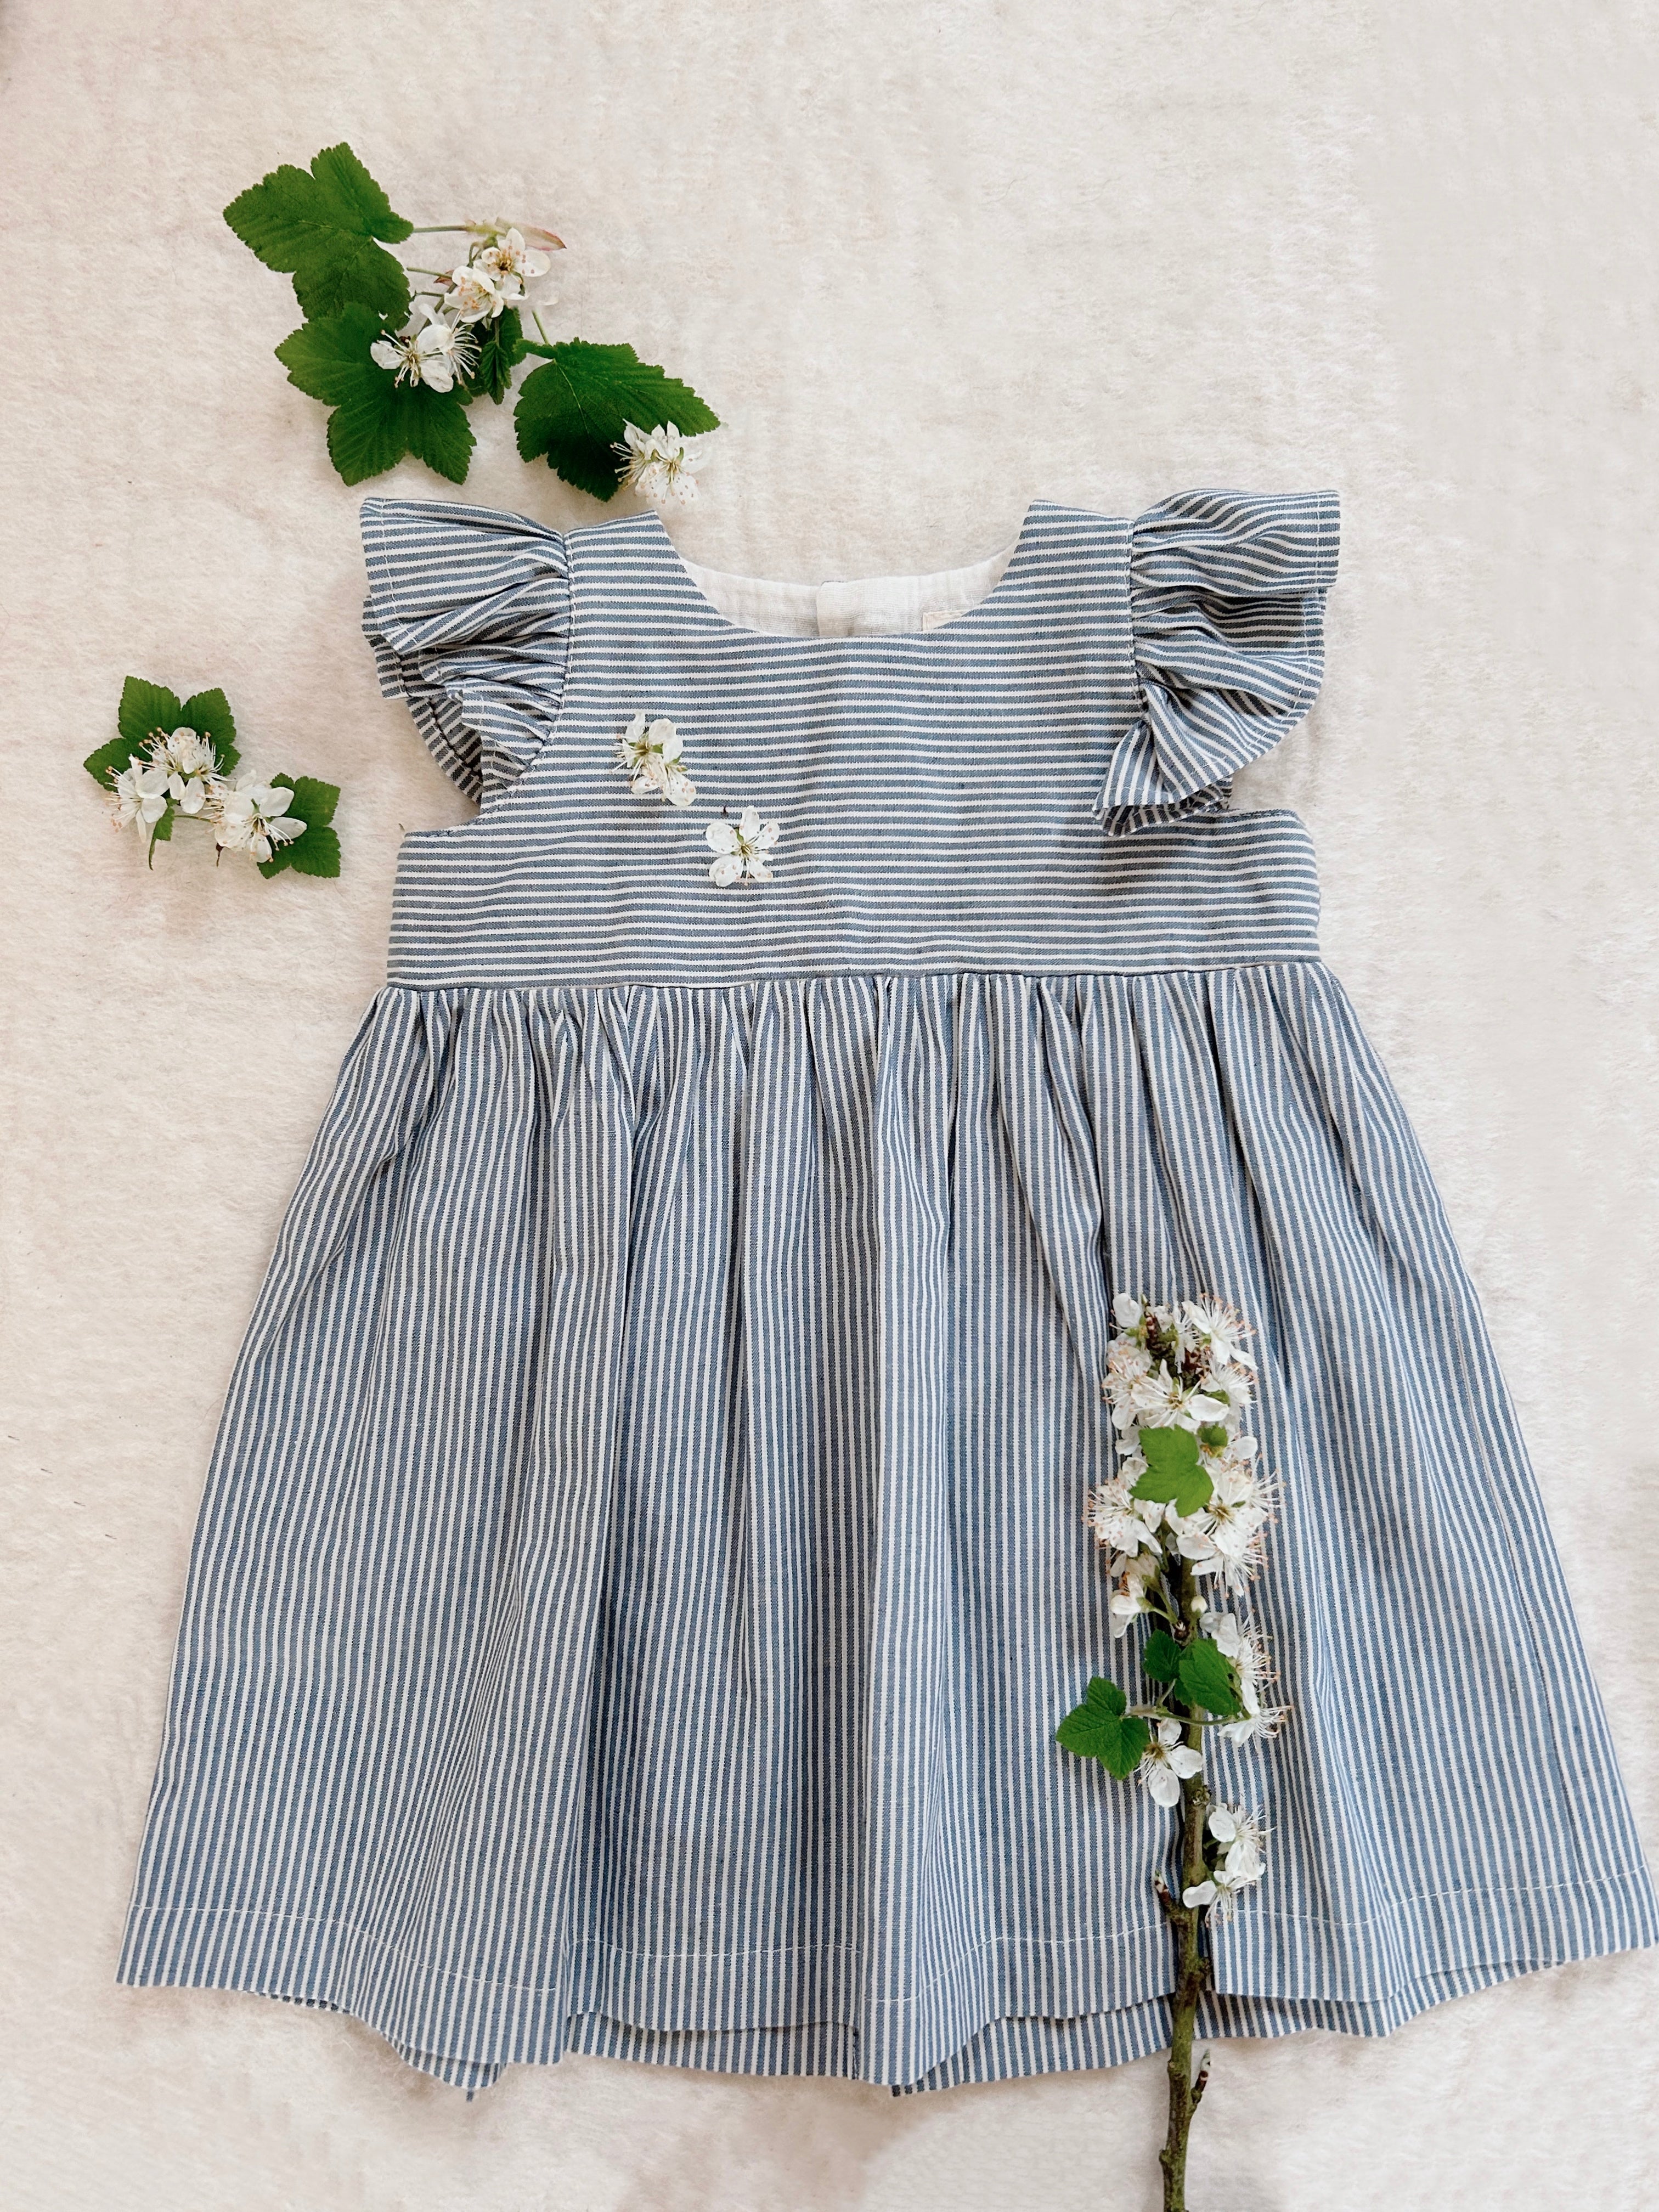 Suzanne Gingham dress